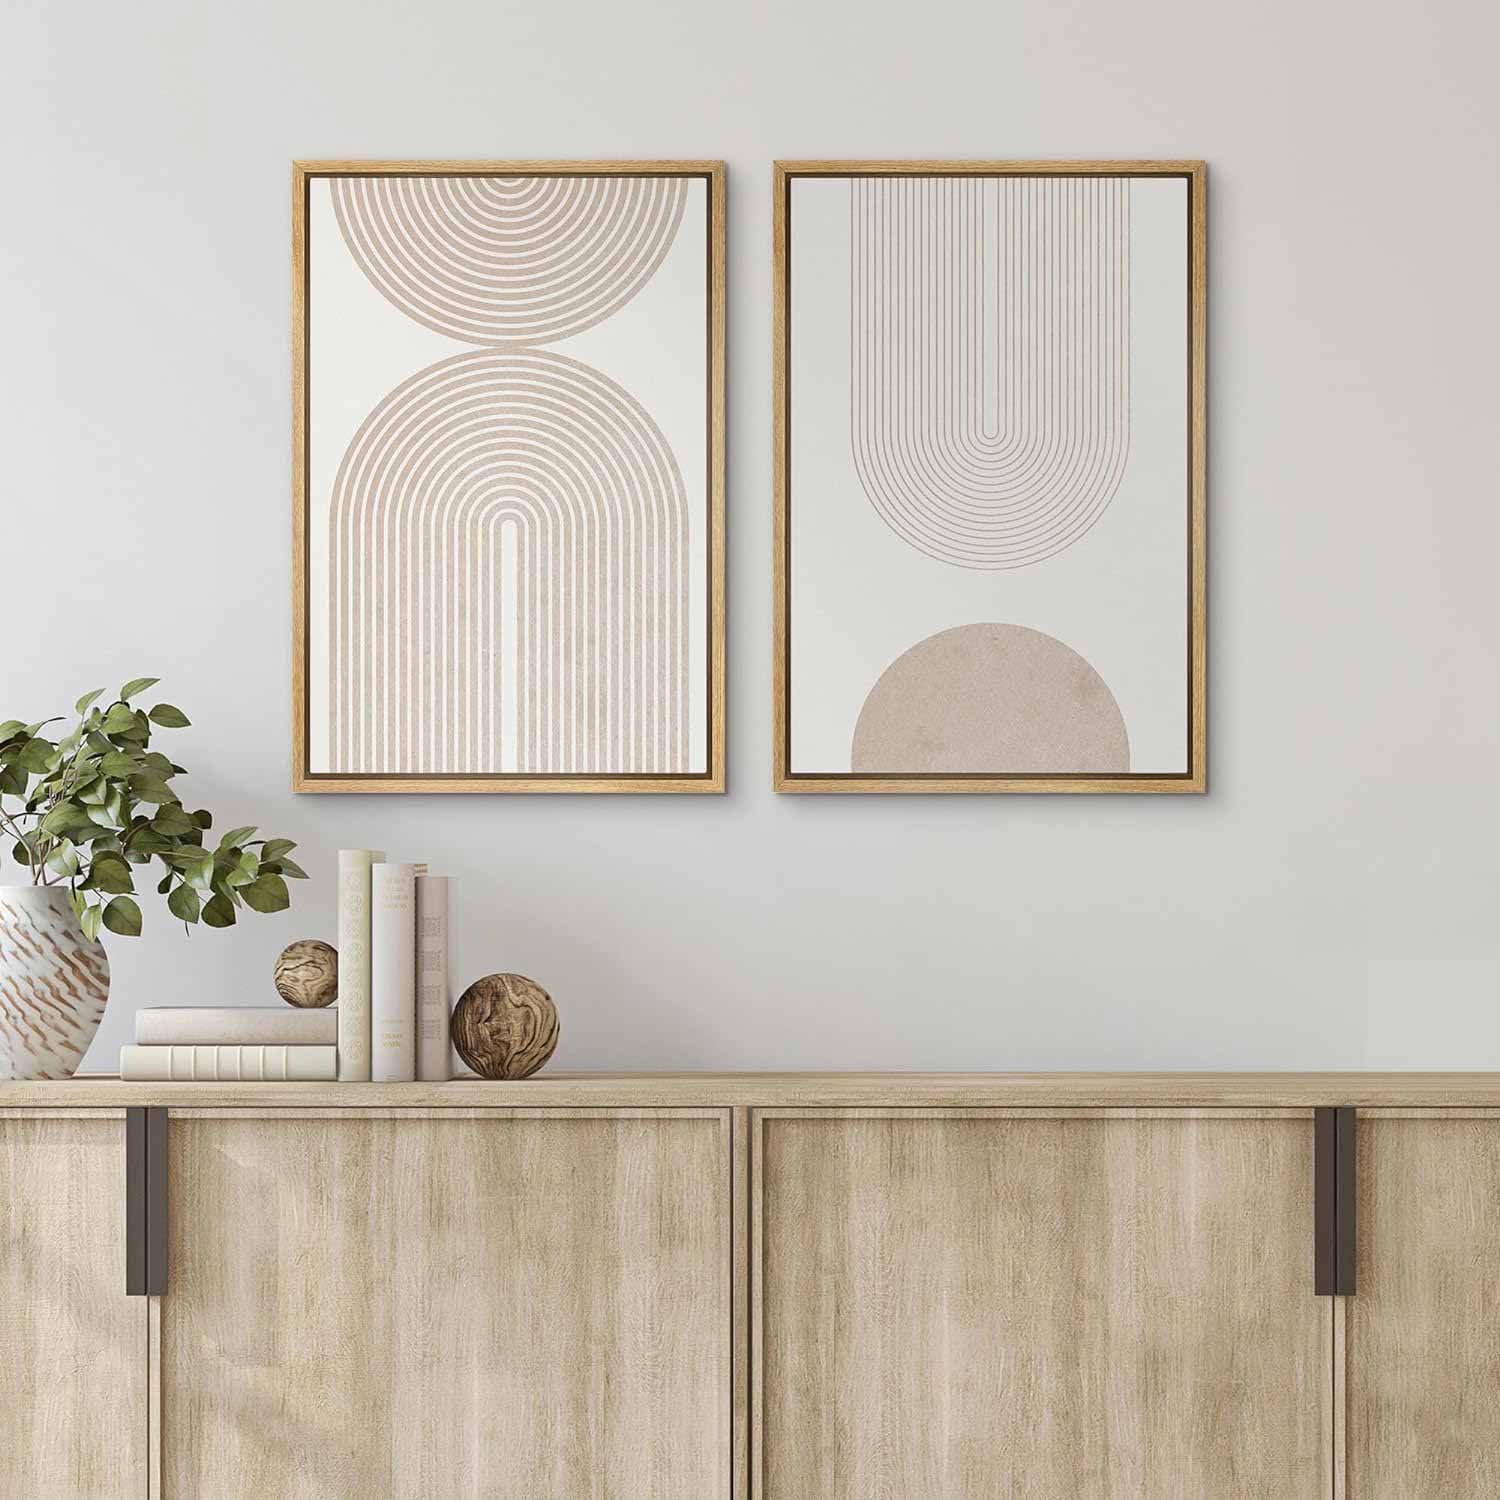 Light room with two abstract geometric wall prints